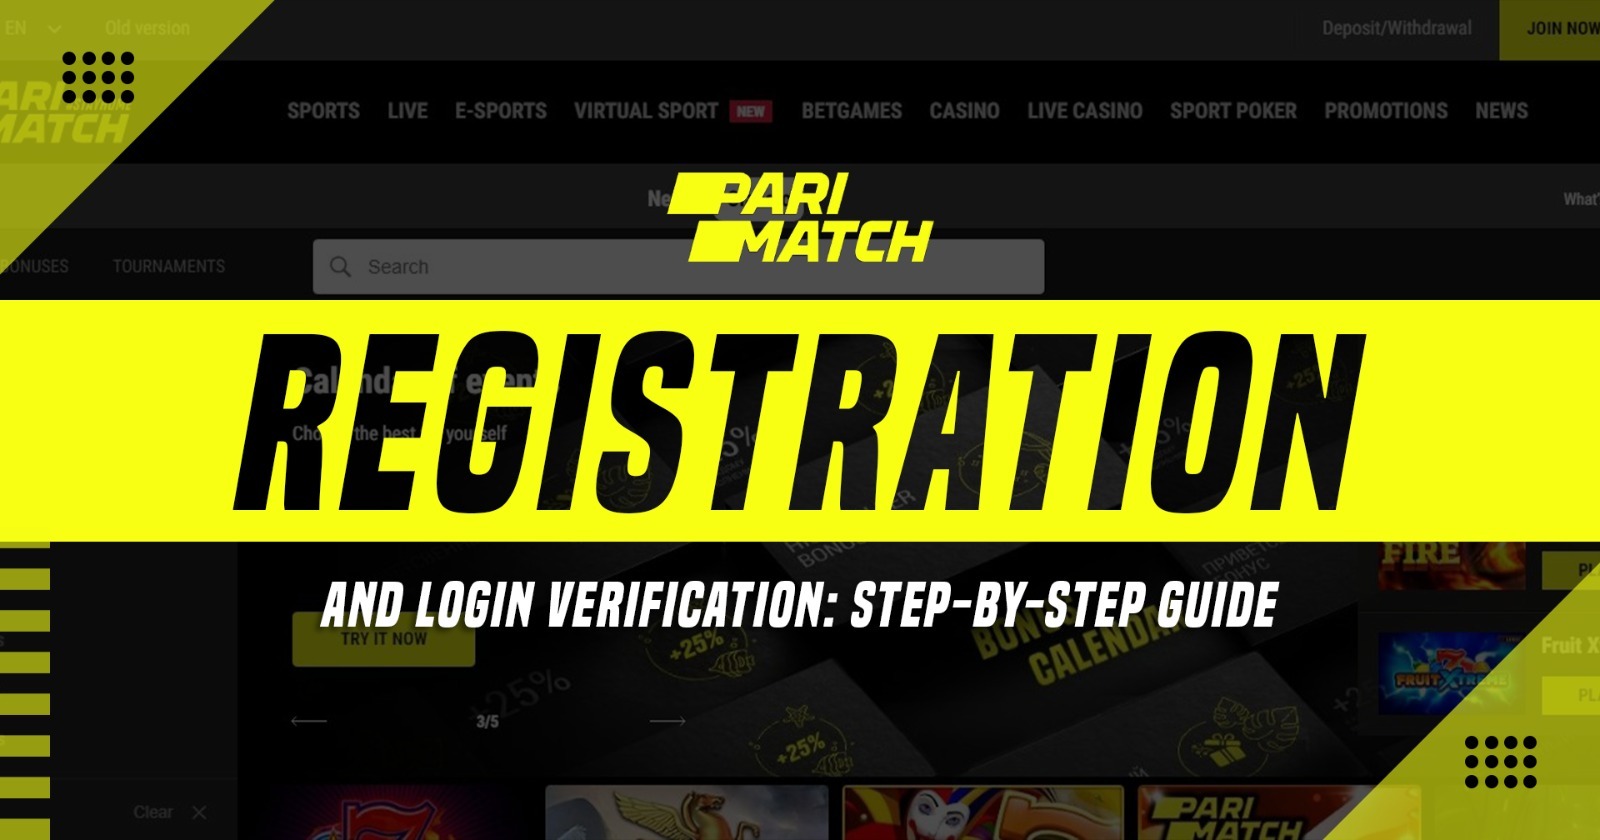 Parimatch Registration and Login Verification Step-by-Step Guide